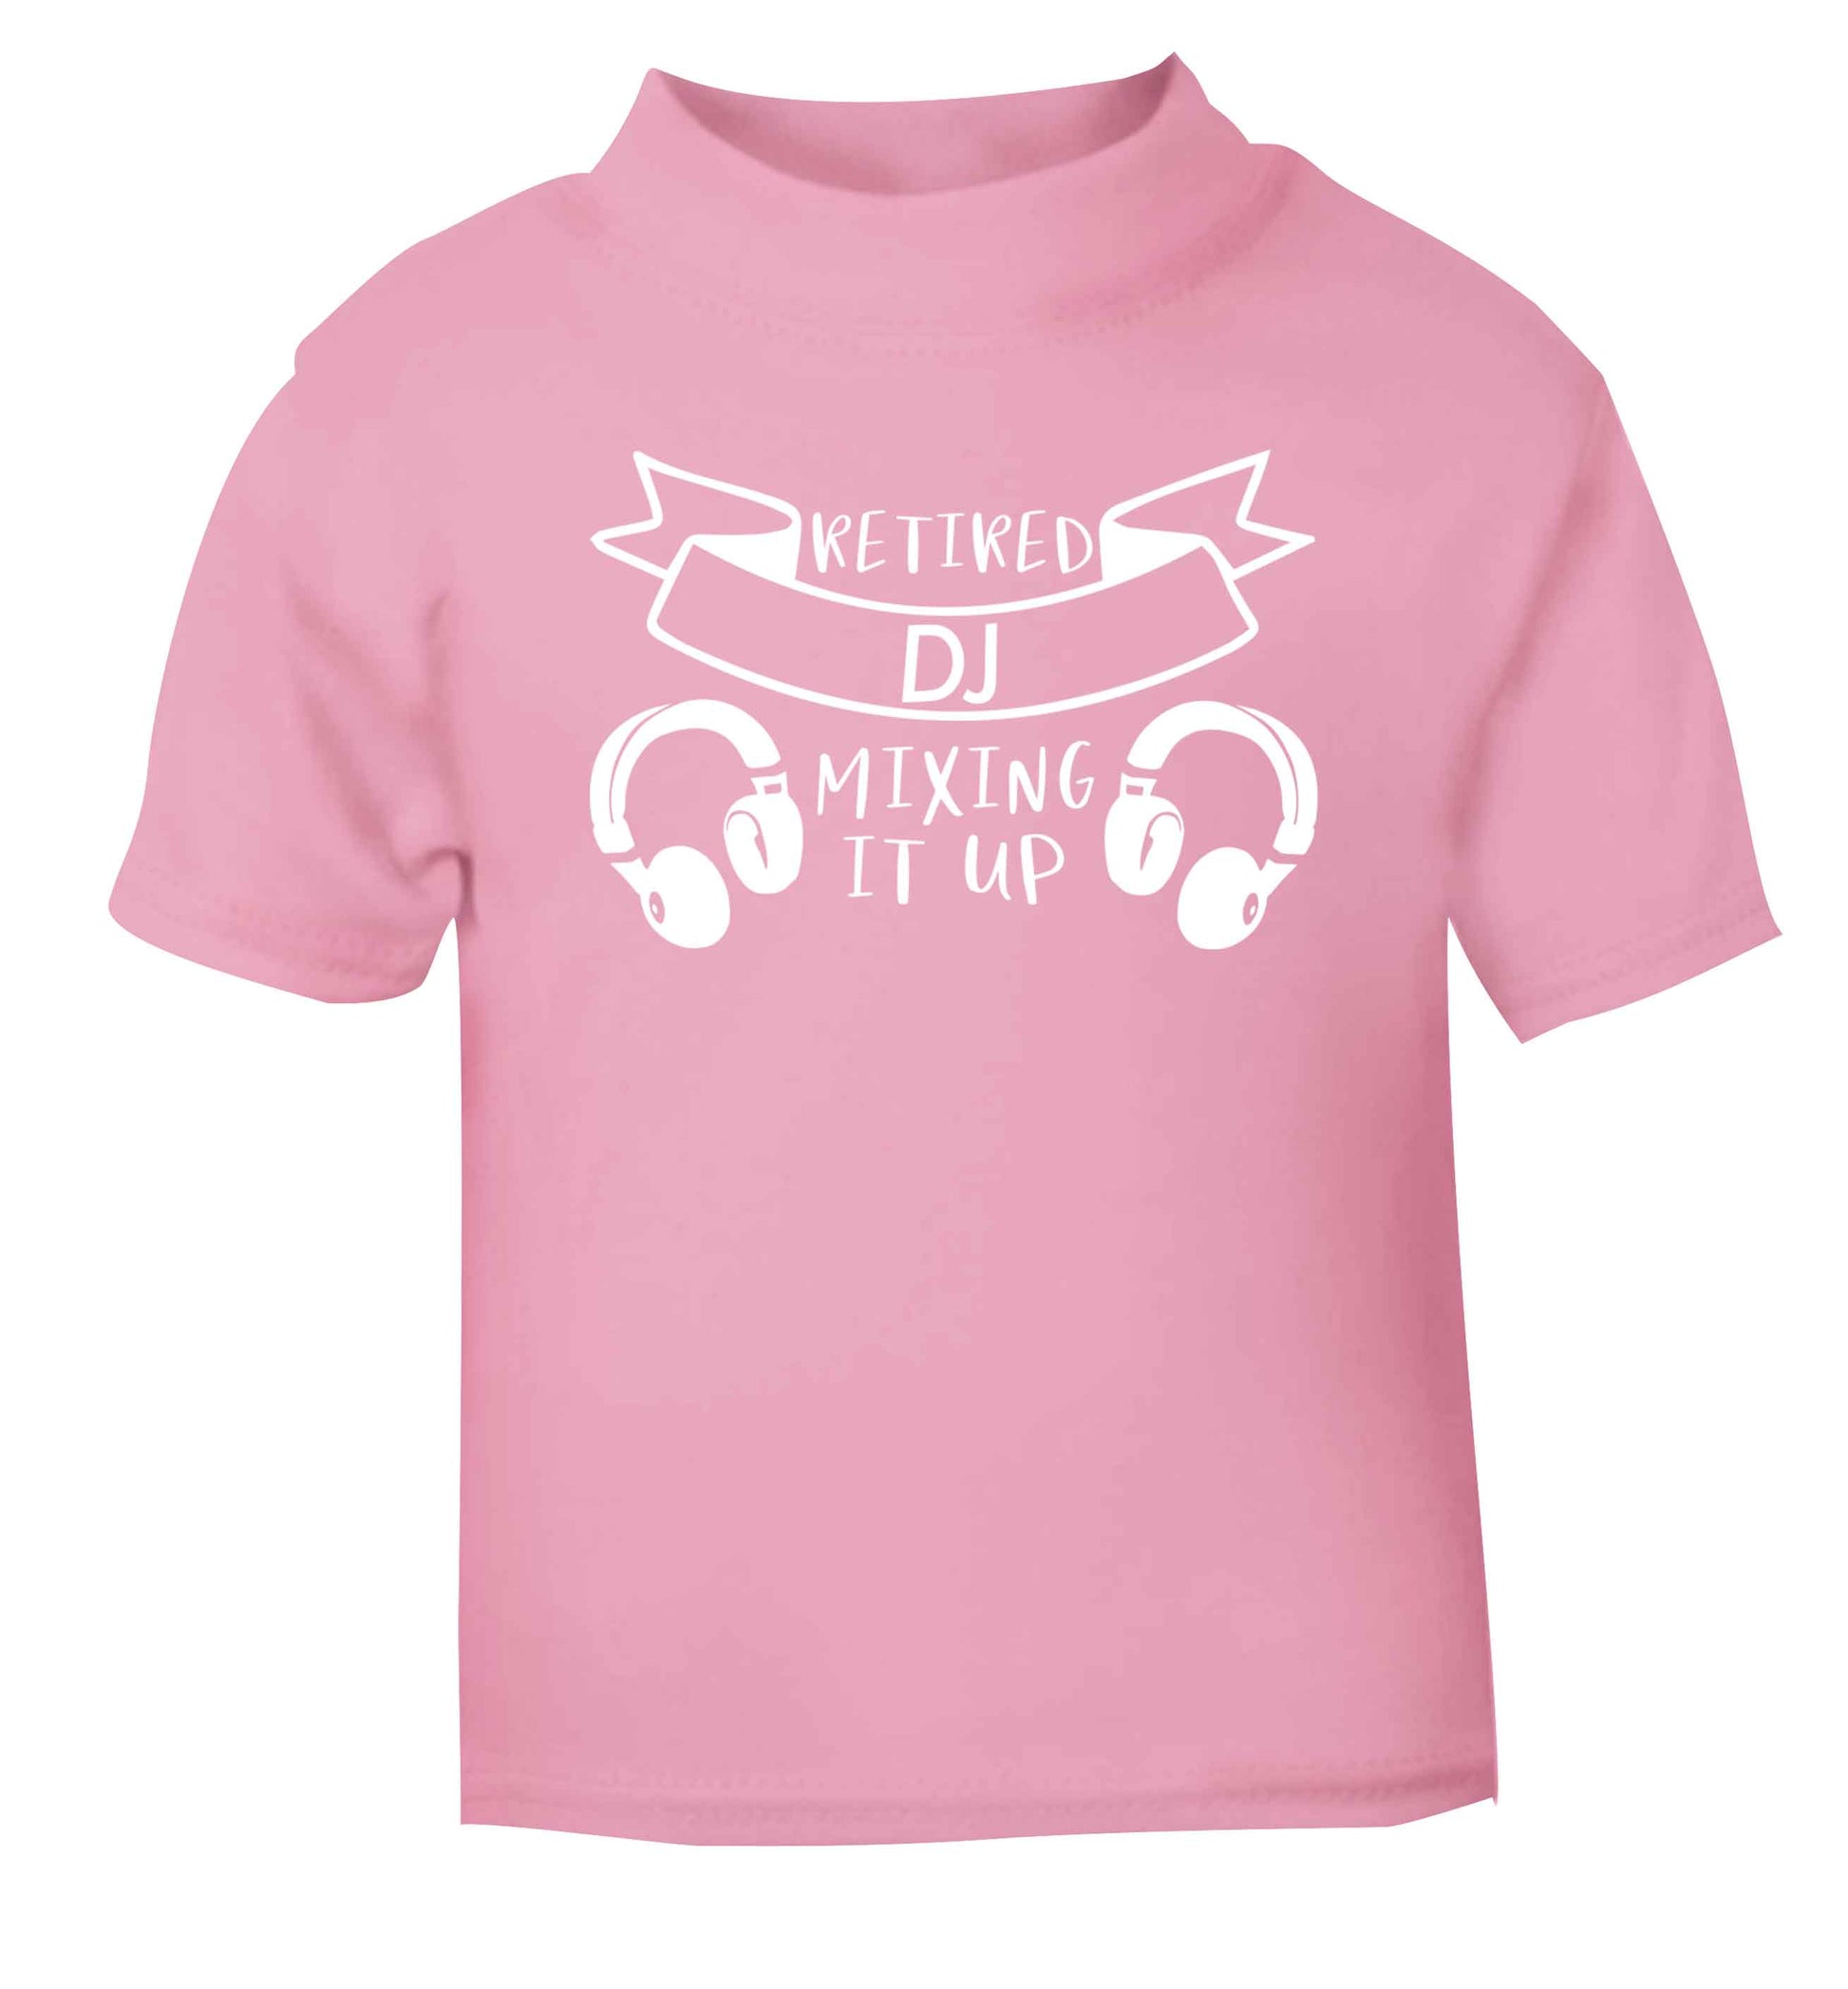 Retired DJ mixing it up light pink Baby Toddler Tshirt 2 Years